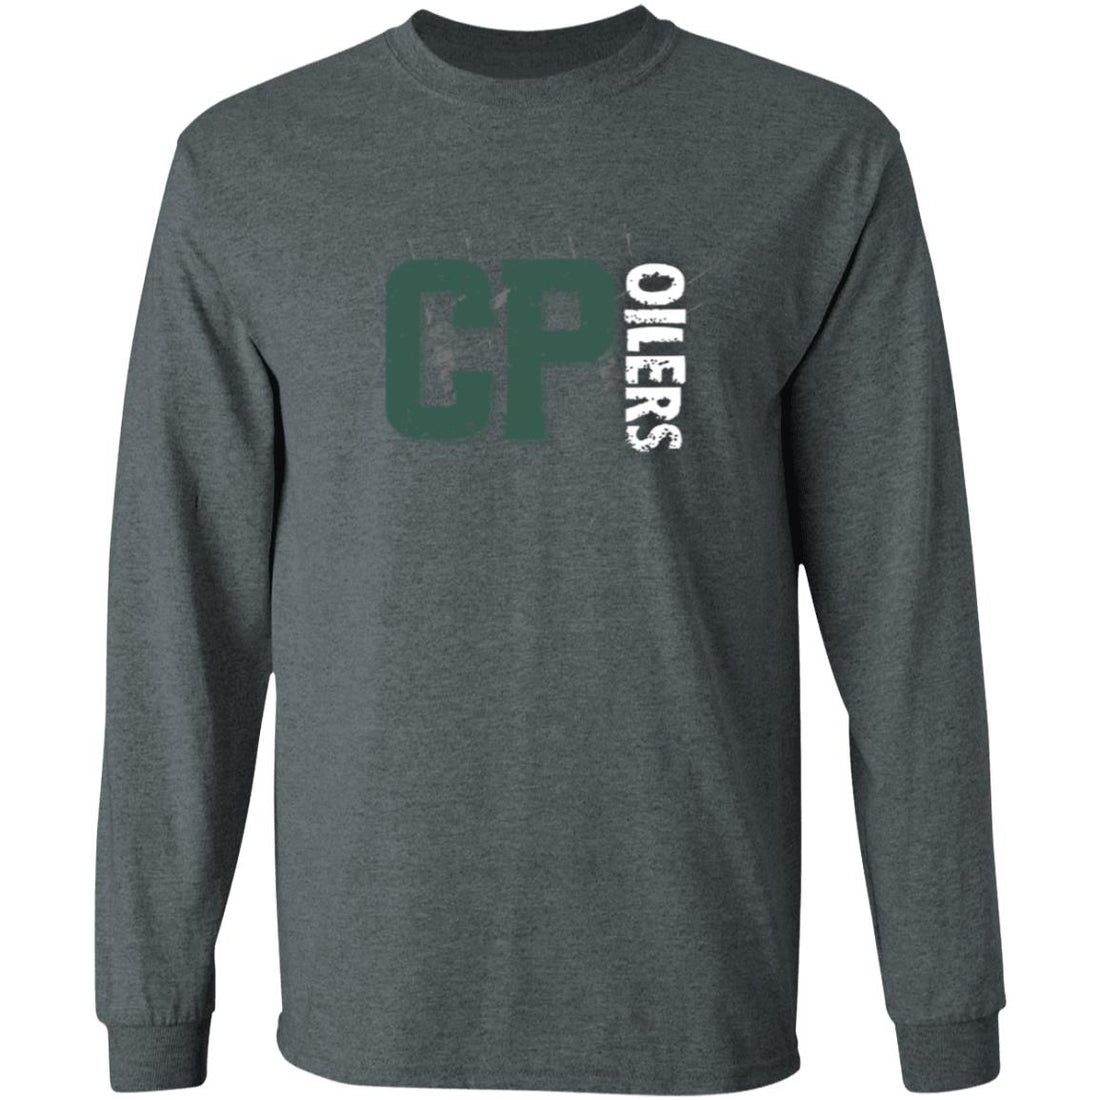 CP Oilers LS T-Shirt 5.3 oz. - T-Shirts - Positively Sassy - CP Oilers LS T-Shirt 5.3 oz.